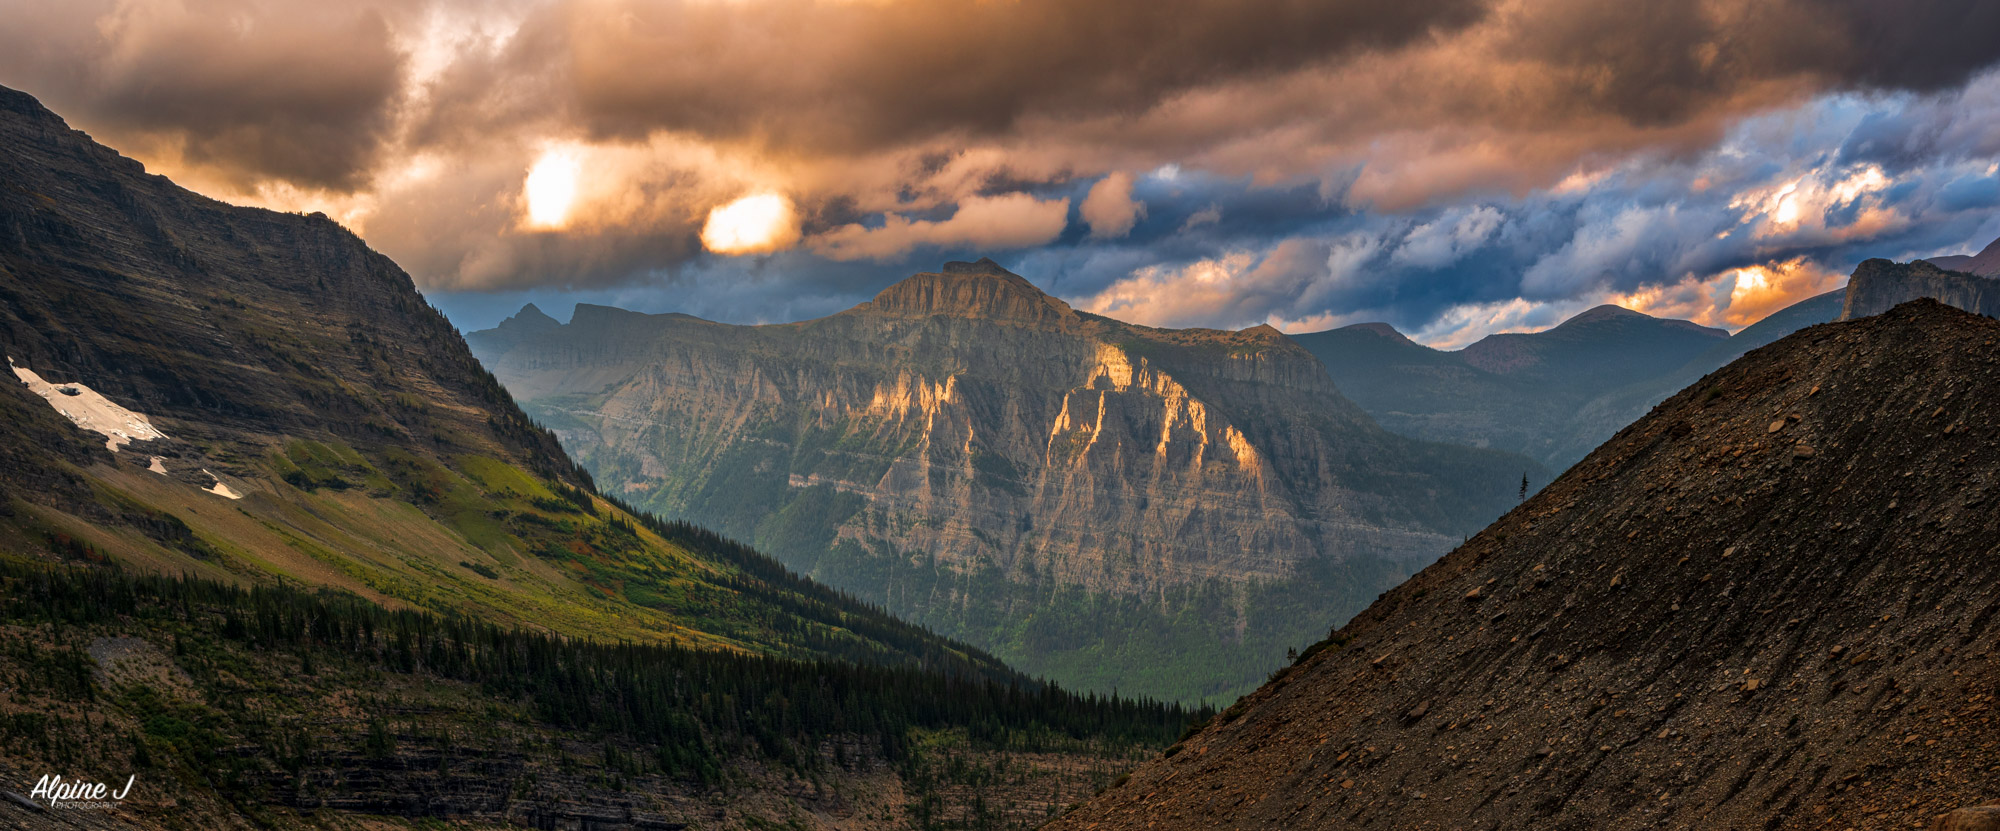 Mountain valley sunset in Glacier National Park, Montana.